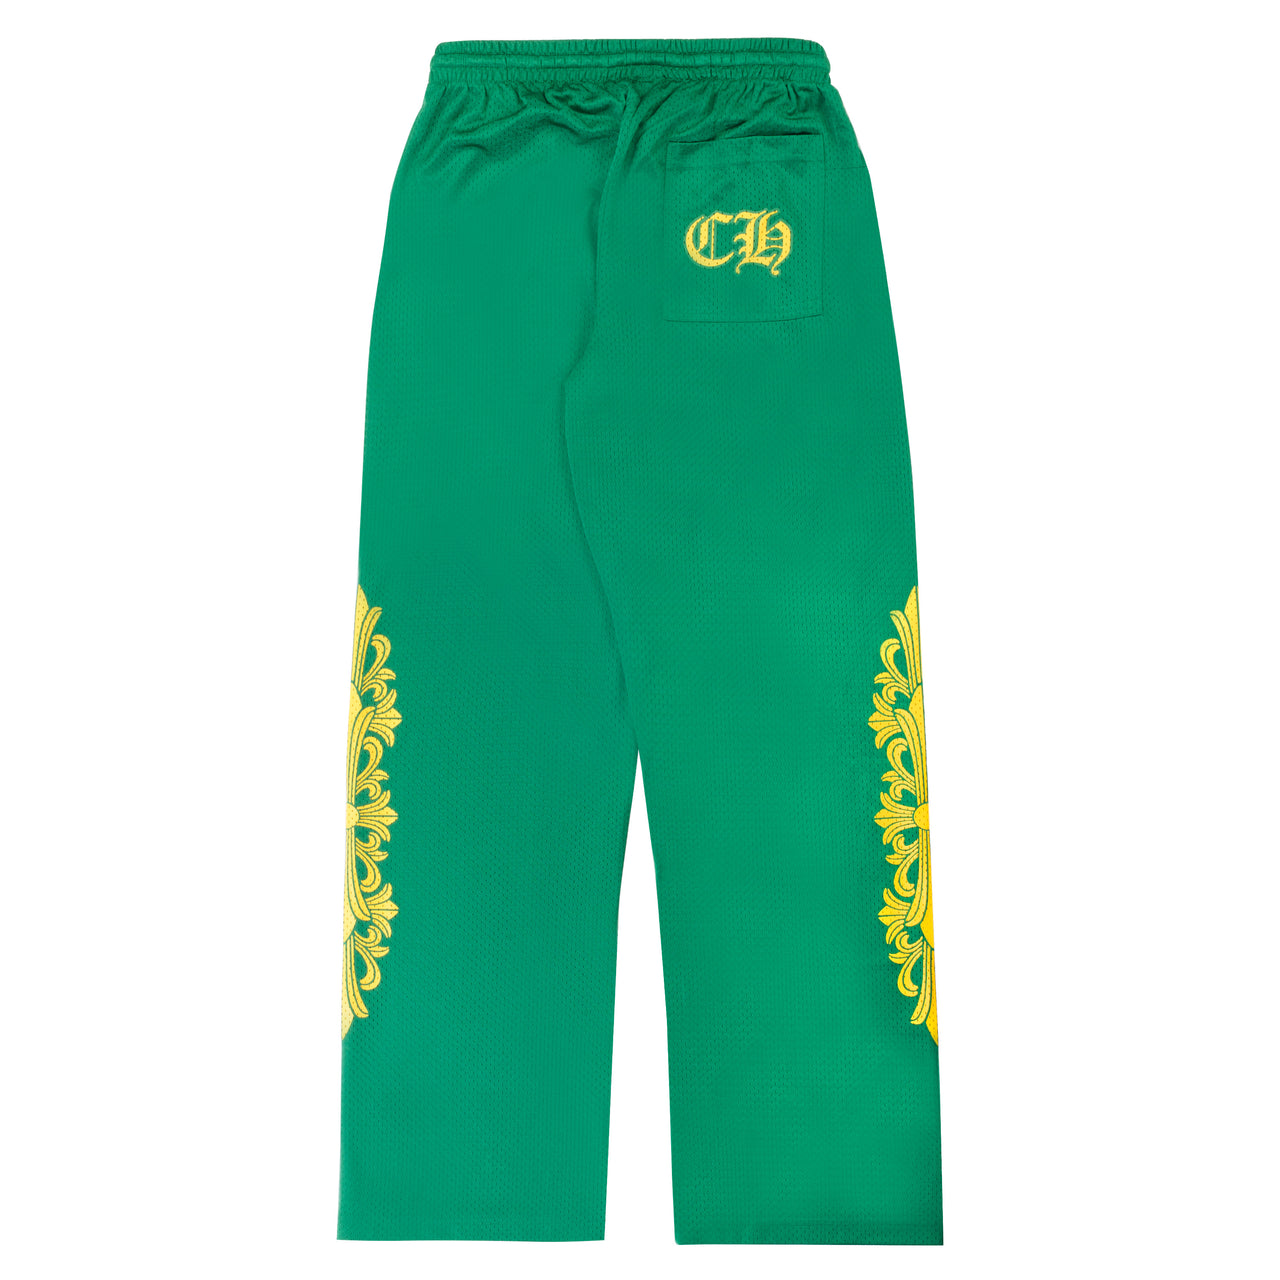 Chrome Hearts Floral Mesh Jersey Pants Green Gold